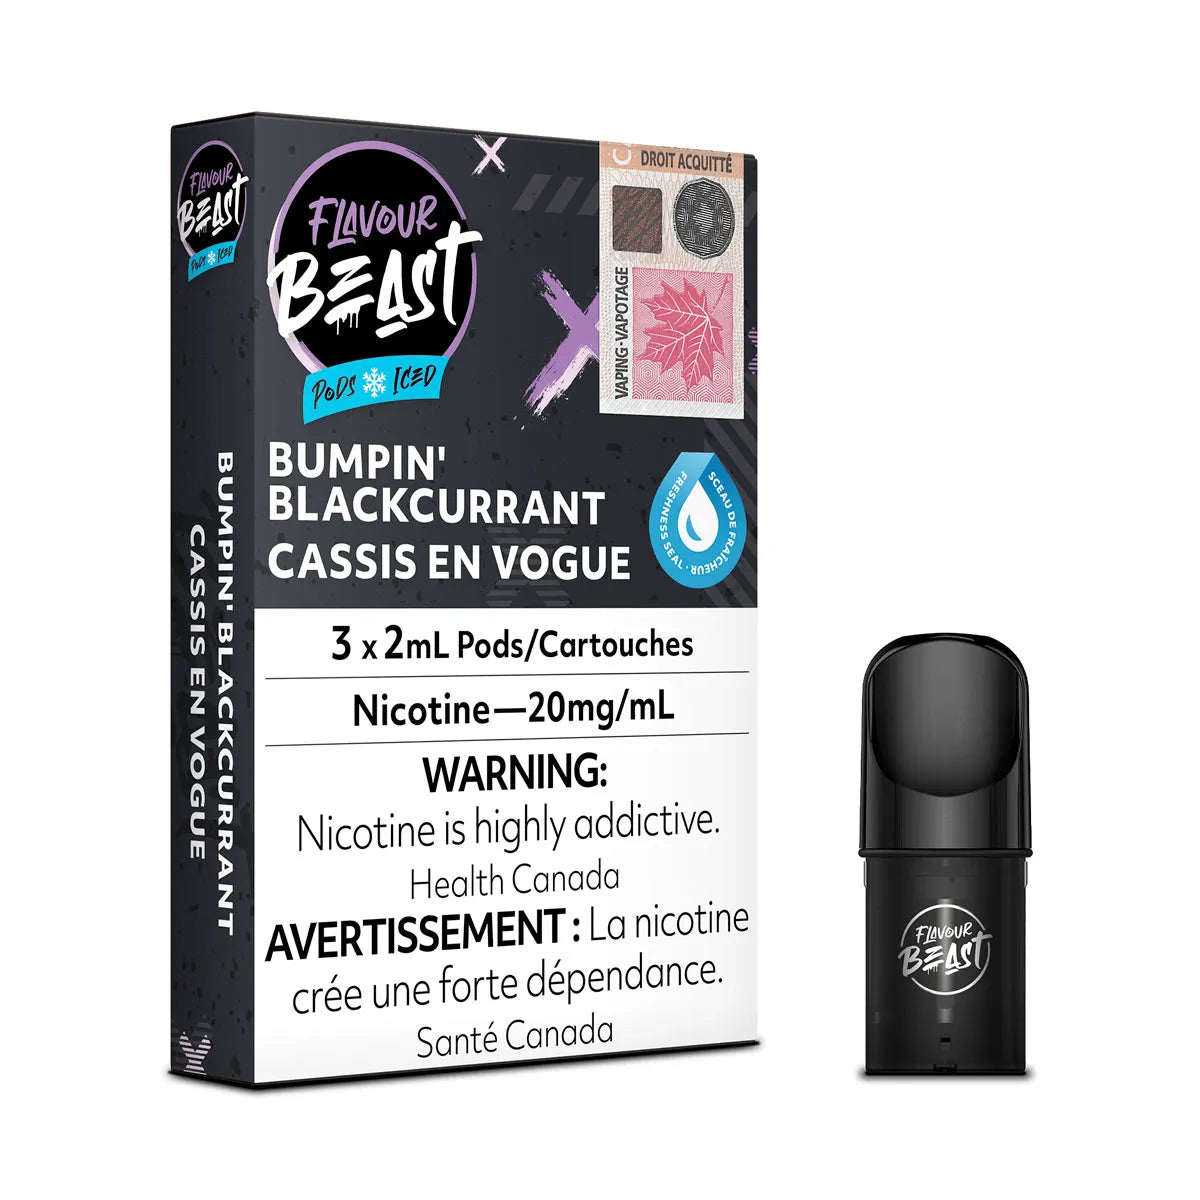 Bumpin' Blackcurrant - Flavour Beast Pod Pack - 20mg - EXCISED